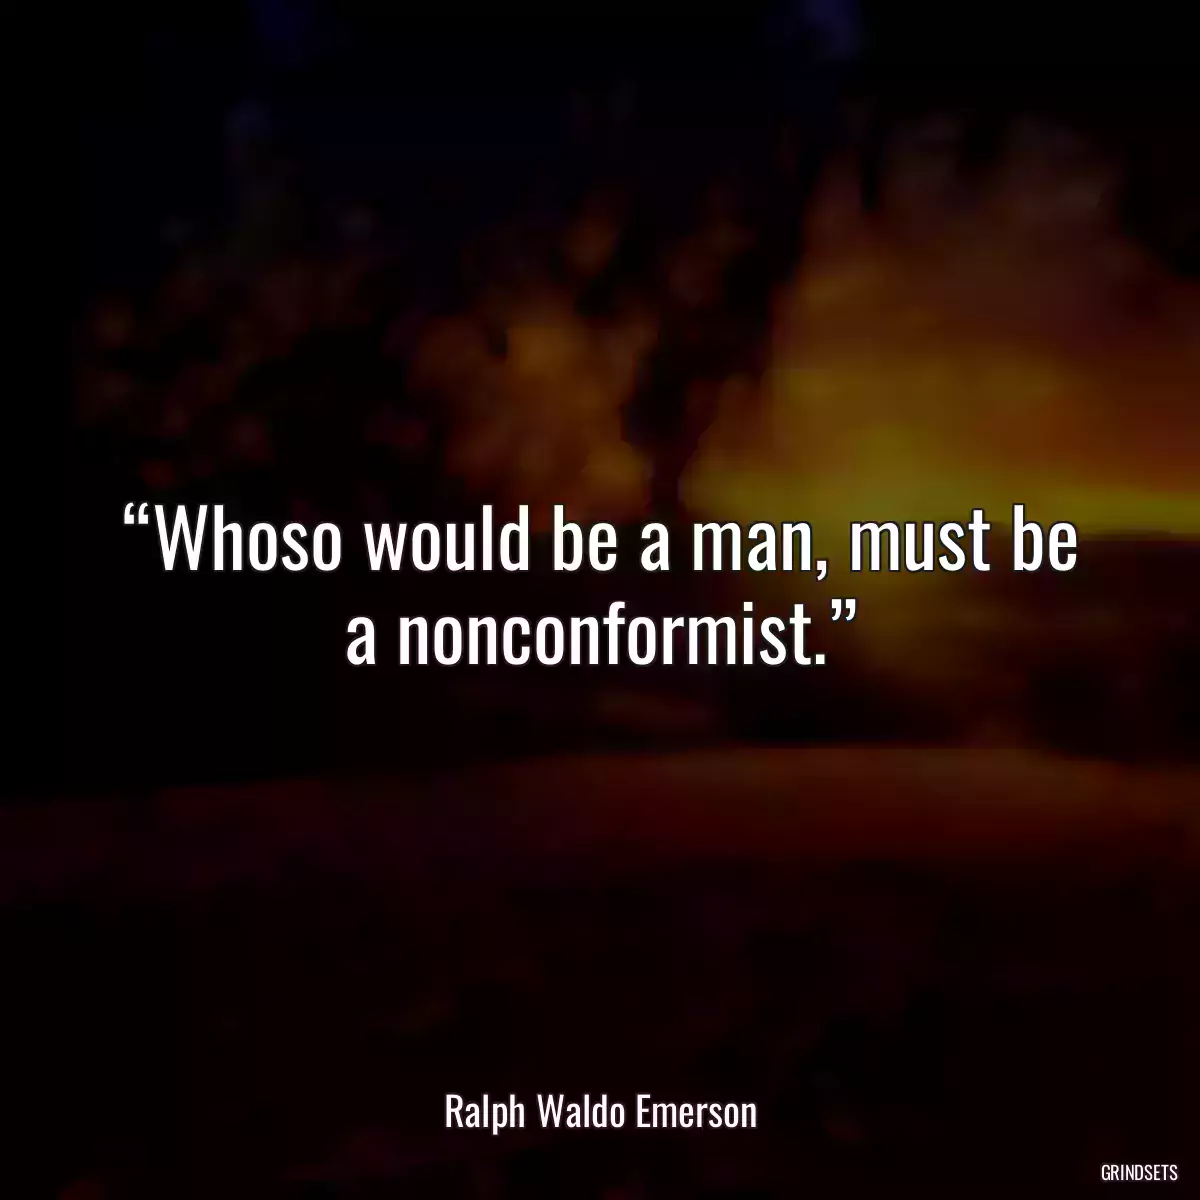 “Whoso would be a man, must be a nonconformist.”